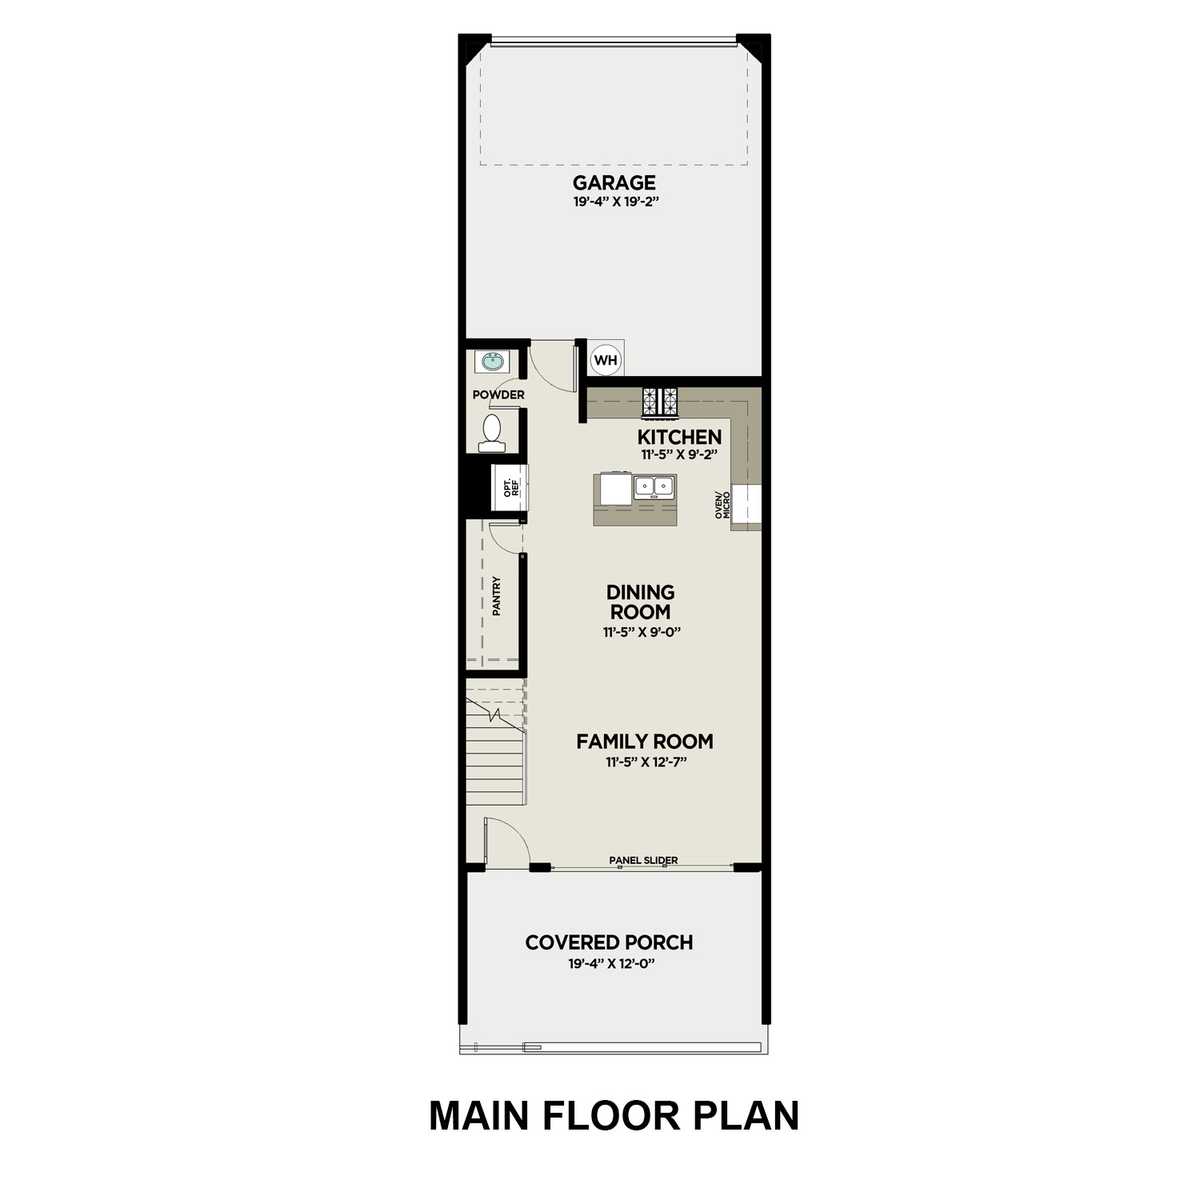 1 - The Seacrest A floor plan layout for 700 Stickley Oak Way in Davidson Homes' The Village at Towne Lake community.